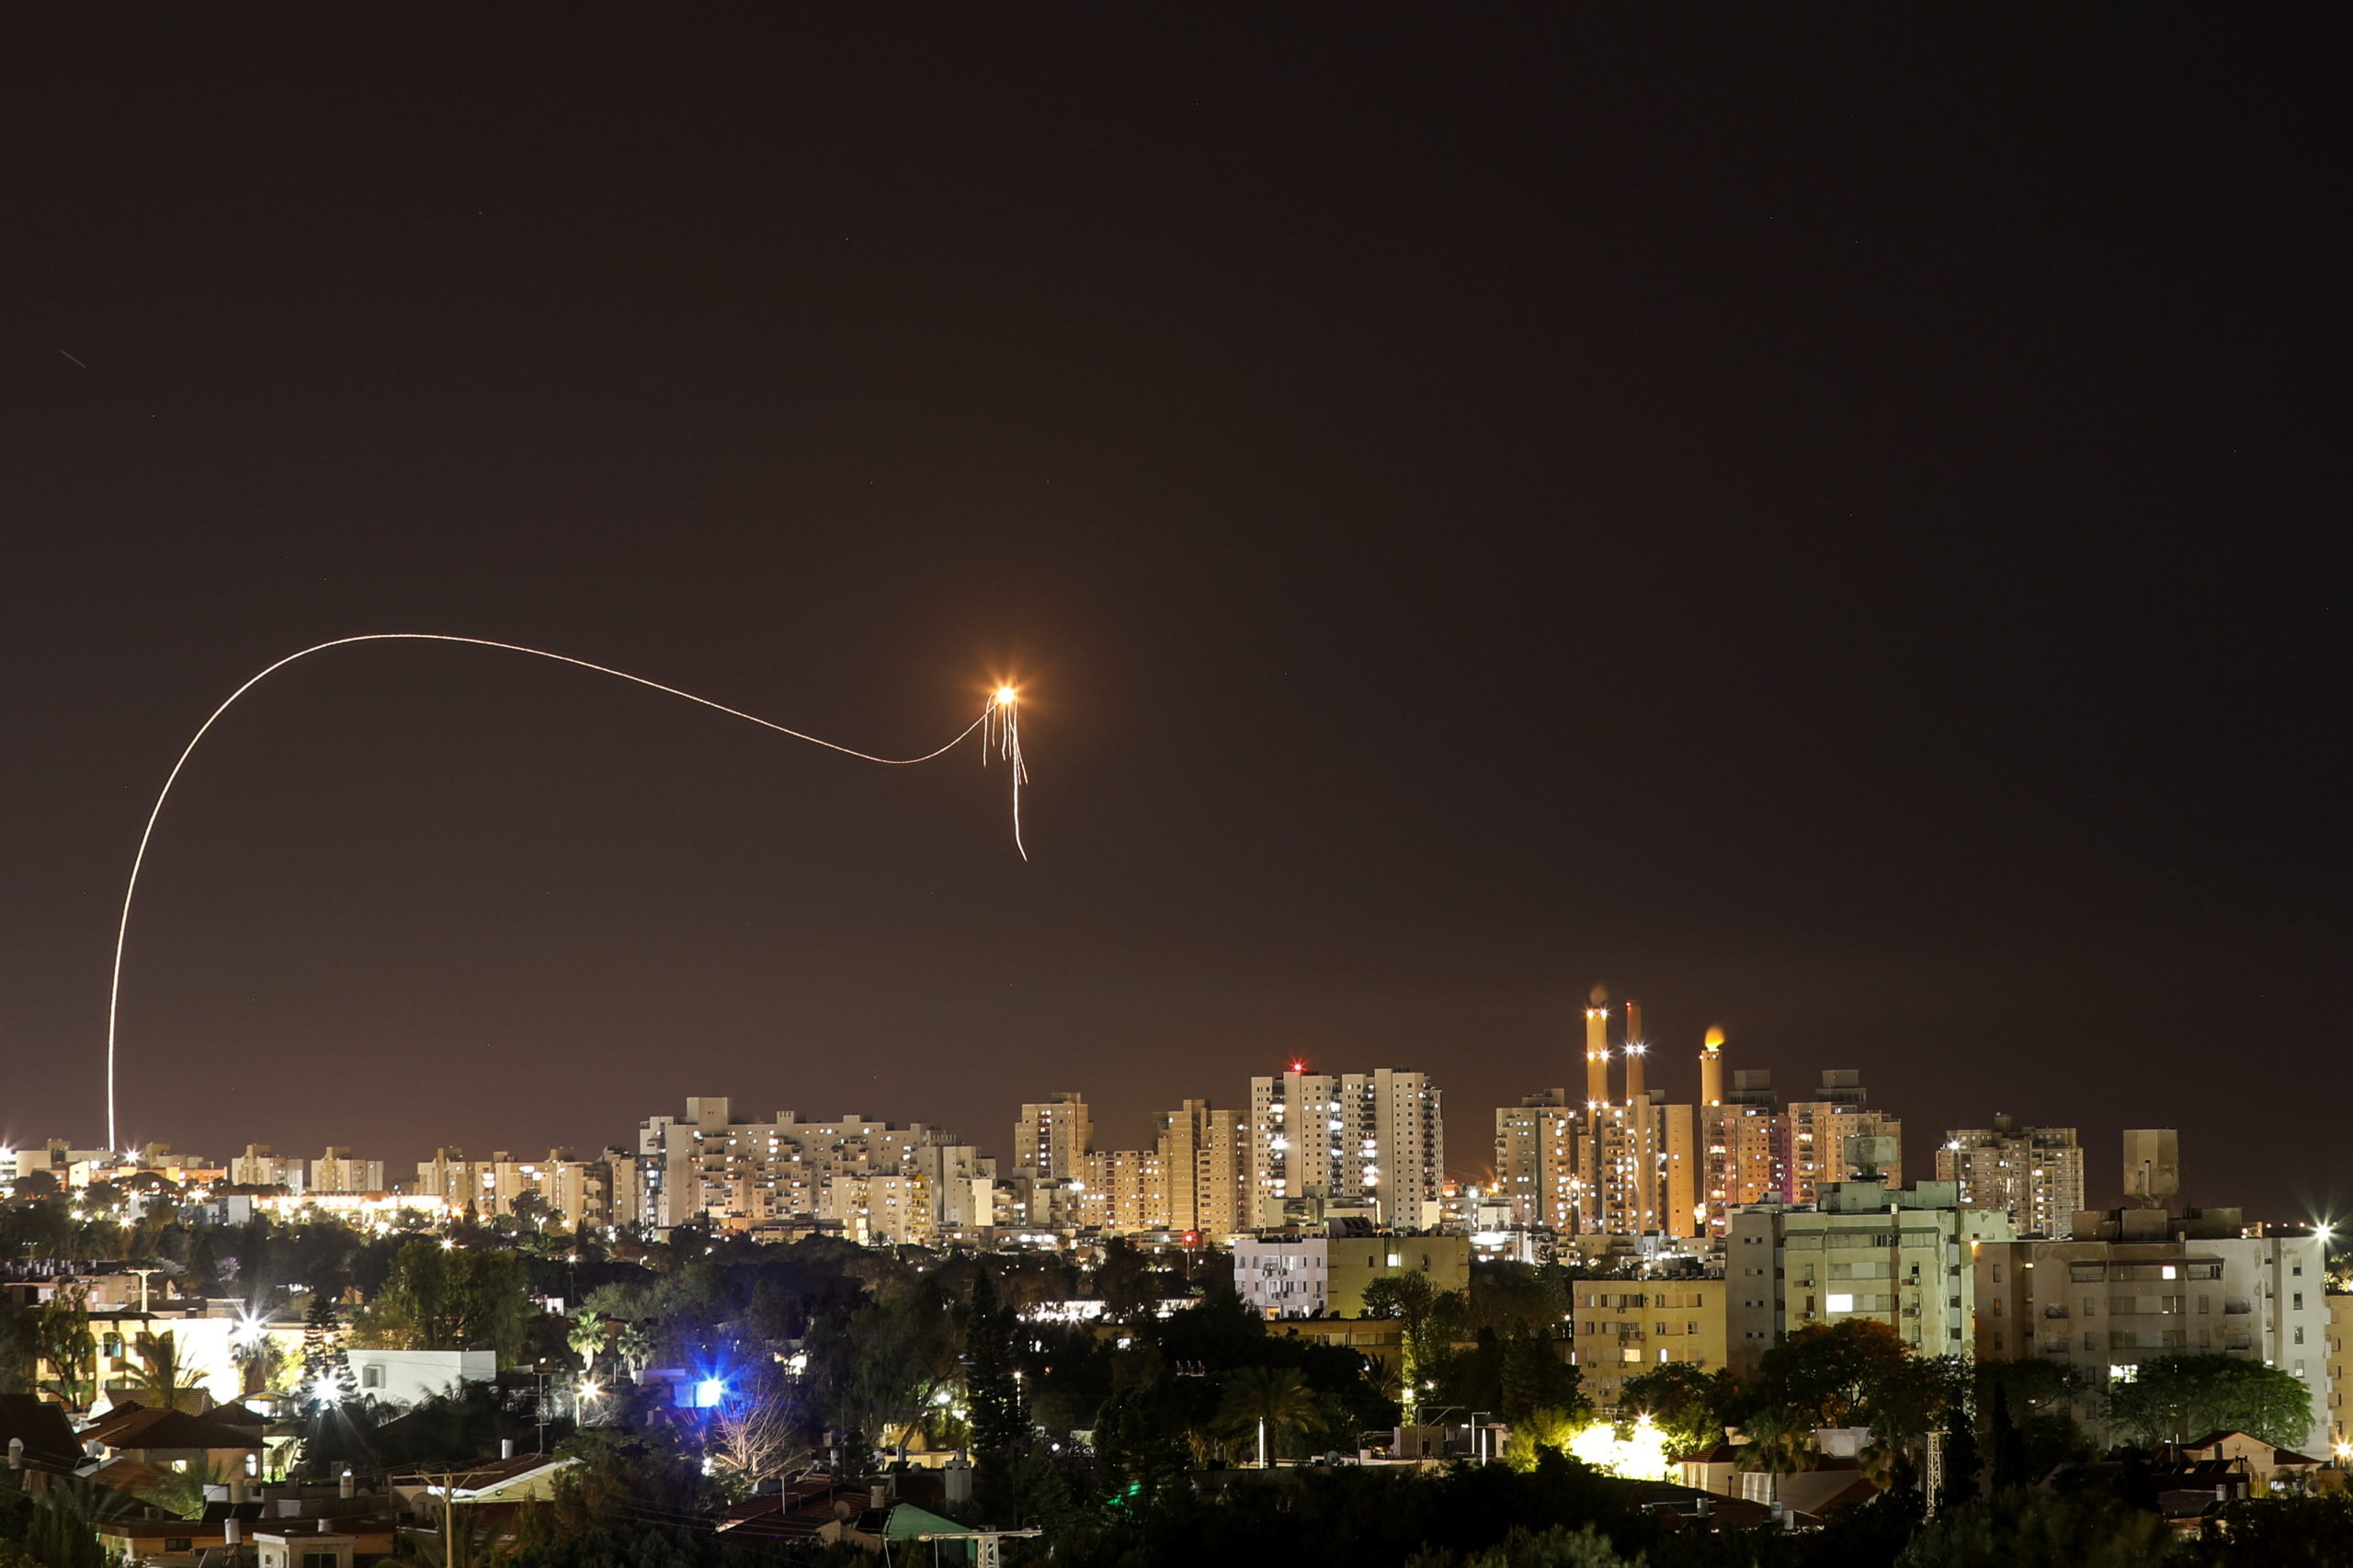 A streak of light is seen as Israel's Iron Dome anti-missile system intercepts rockets launched from the Gaza Strip towards Israel, as seen from Ashkelon, Israel May 16, 2021. REUTERS/Amir Cohen